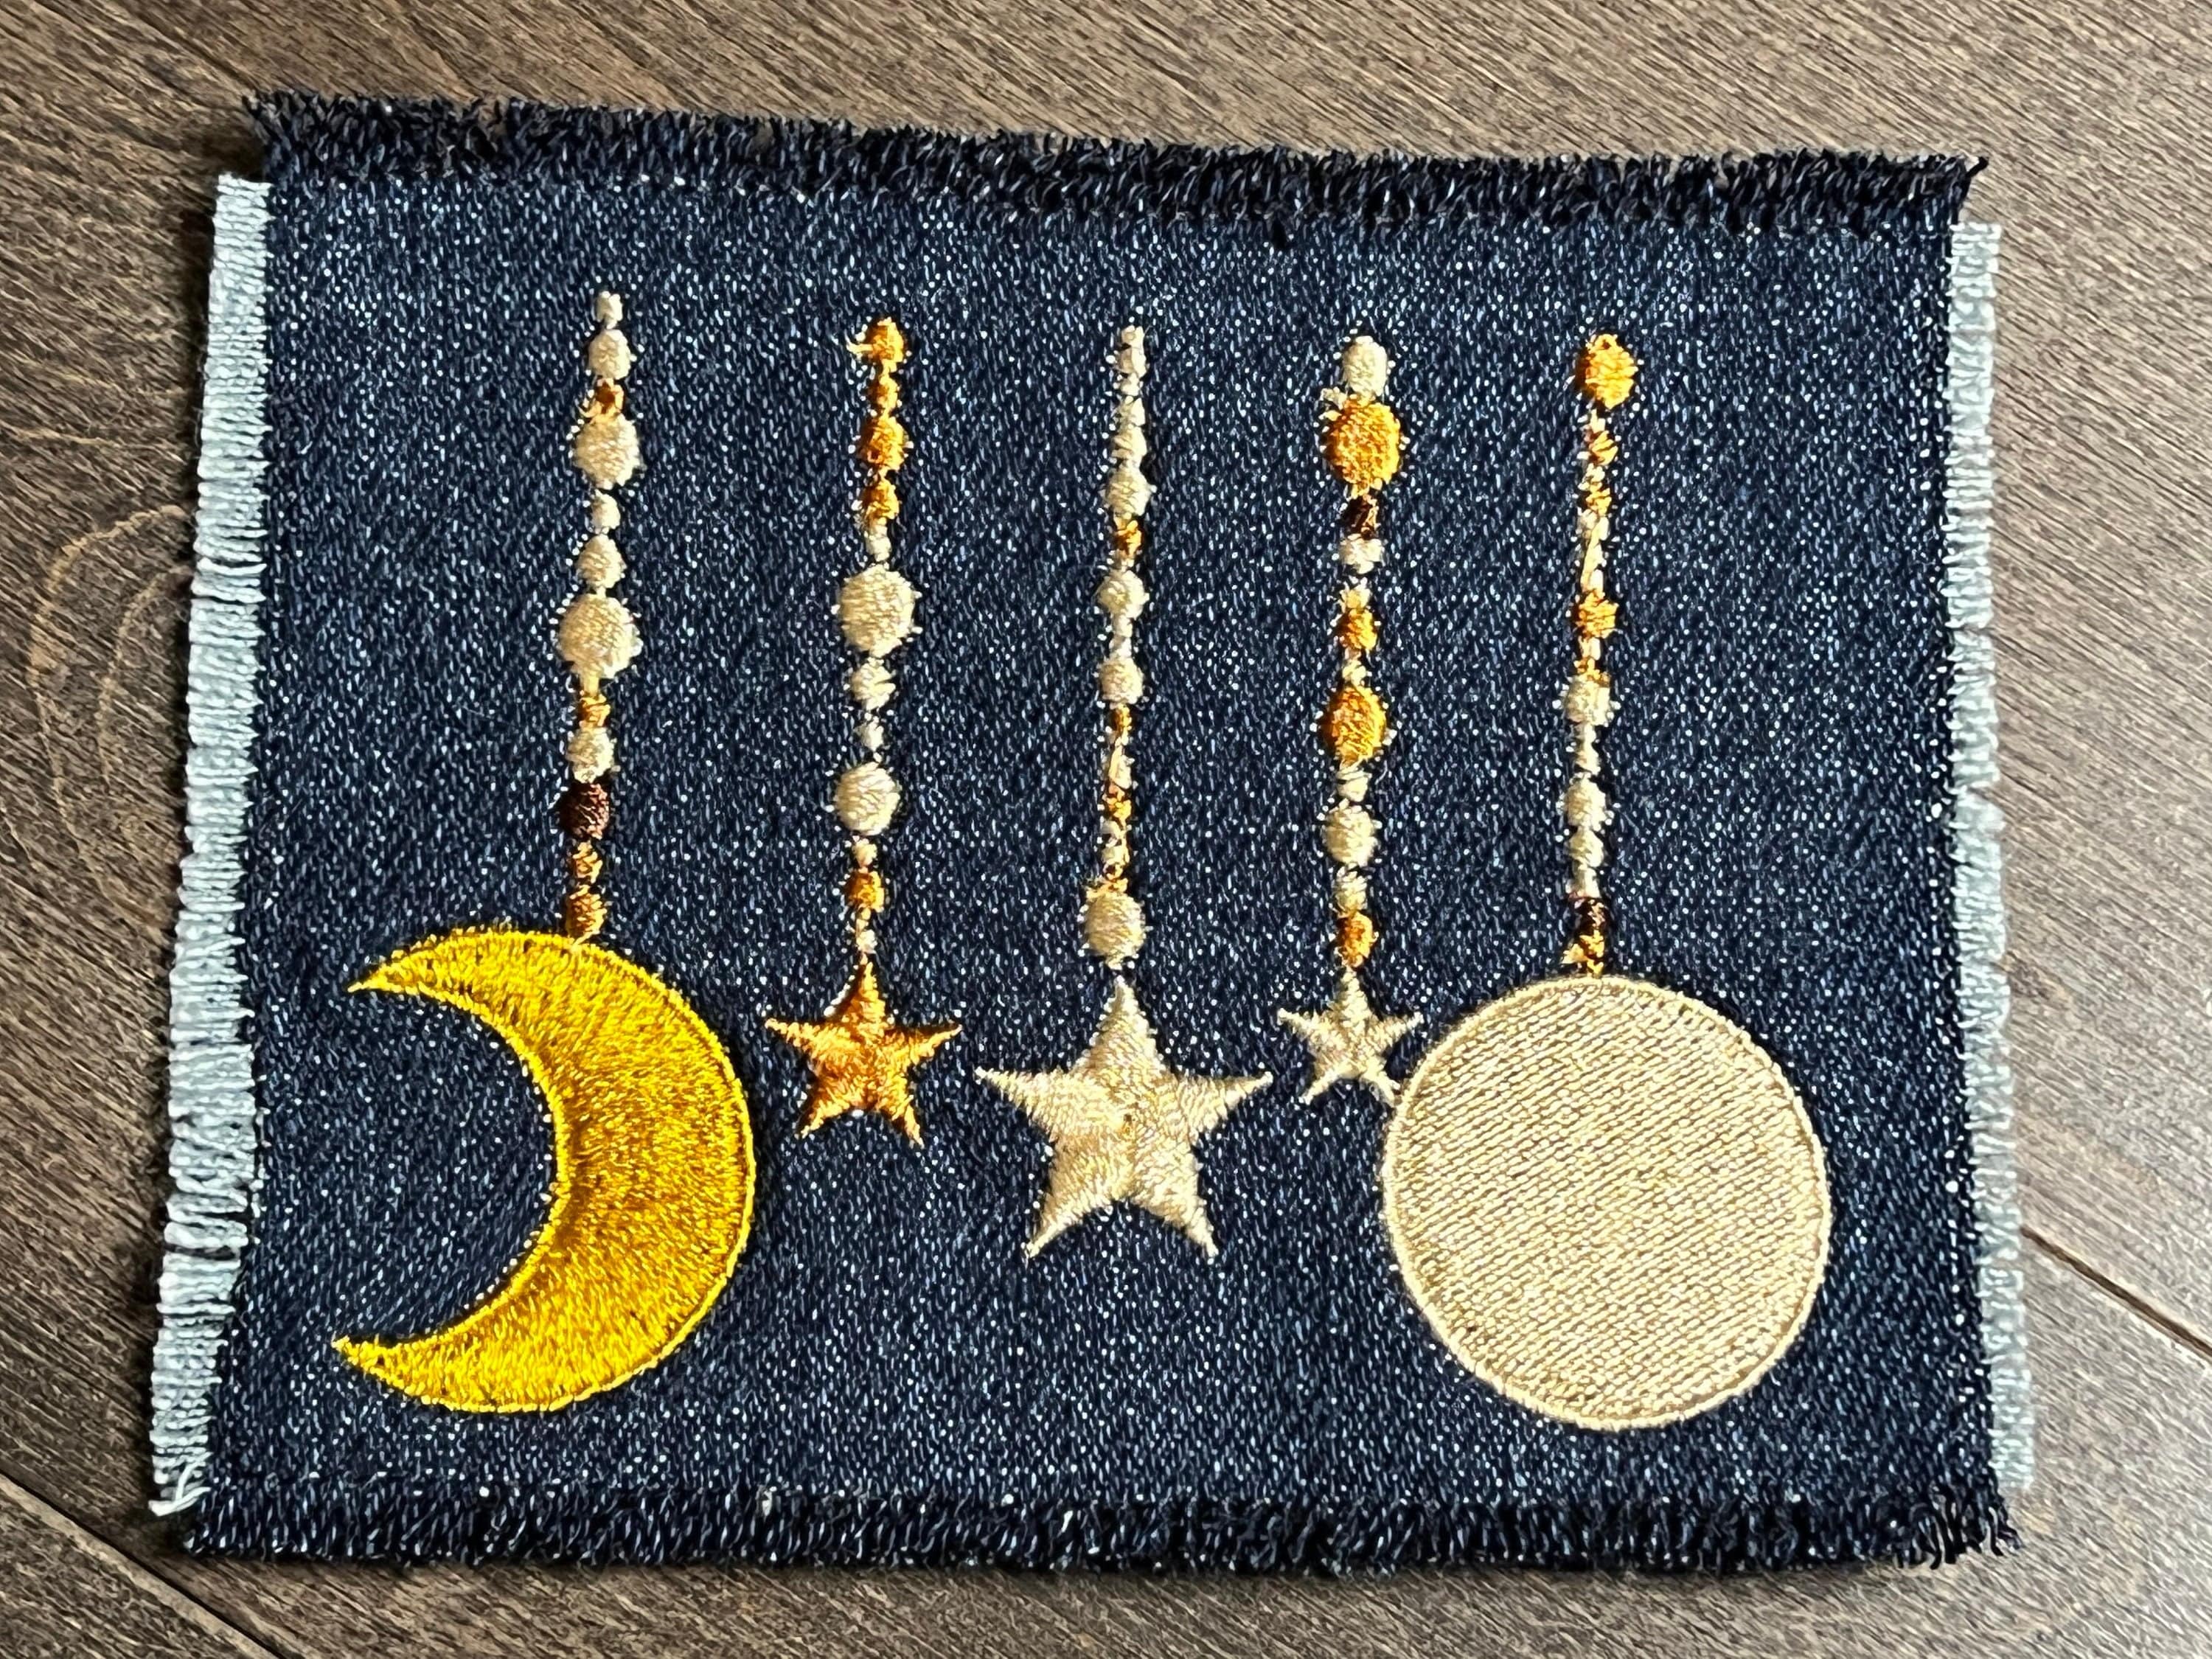 Twinkle little Star Moon phases CELESTIAL SOULE PATCH art Indigo blue Denim Iron On Patch 4.5 X 3.5 multi color embroidered